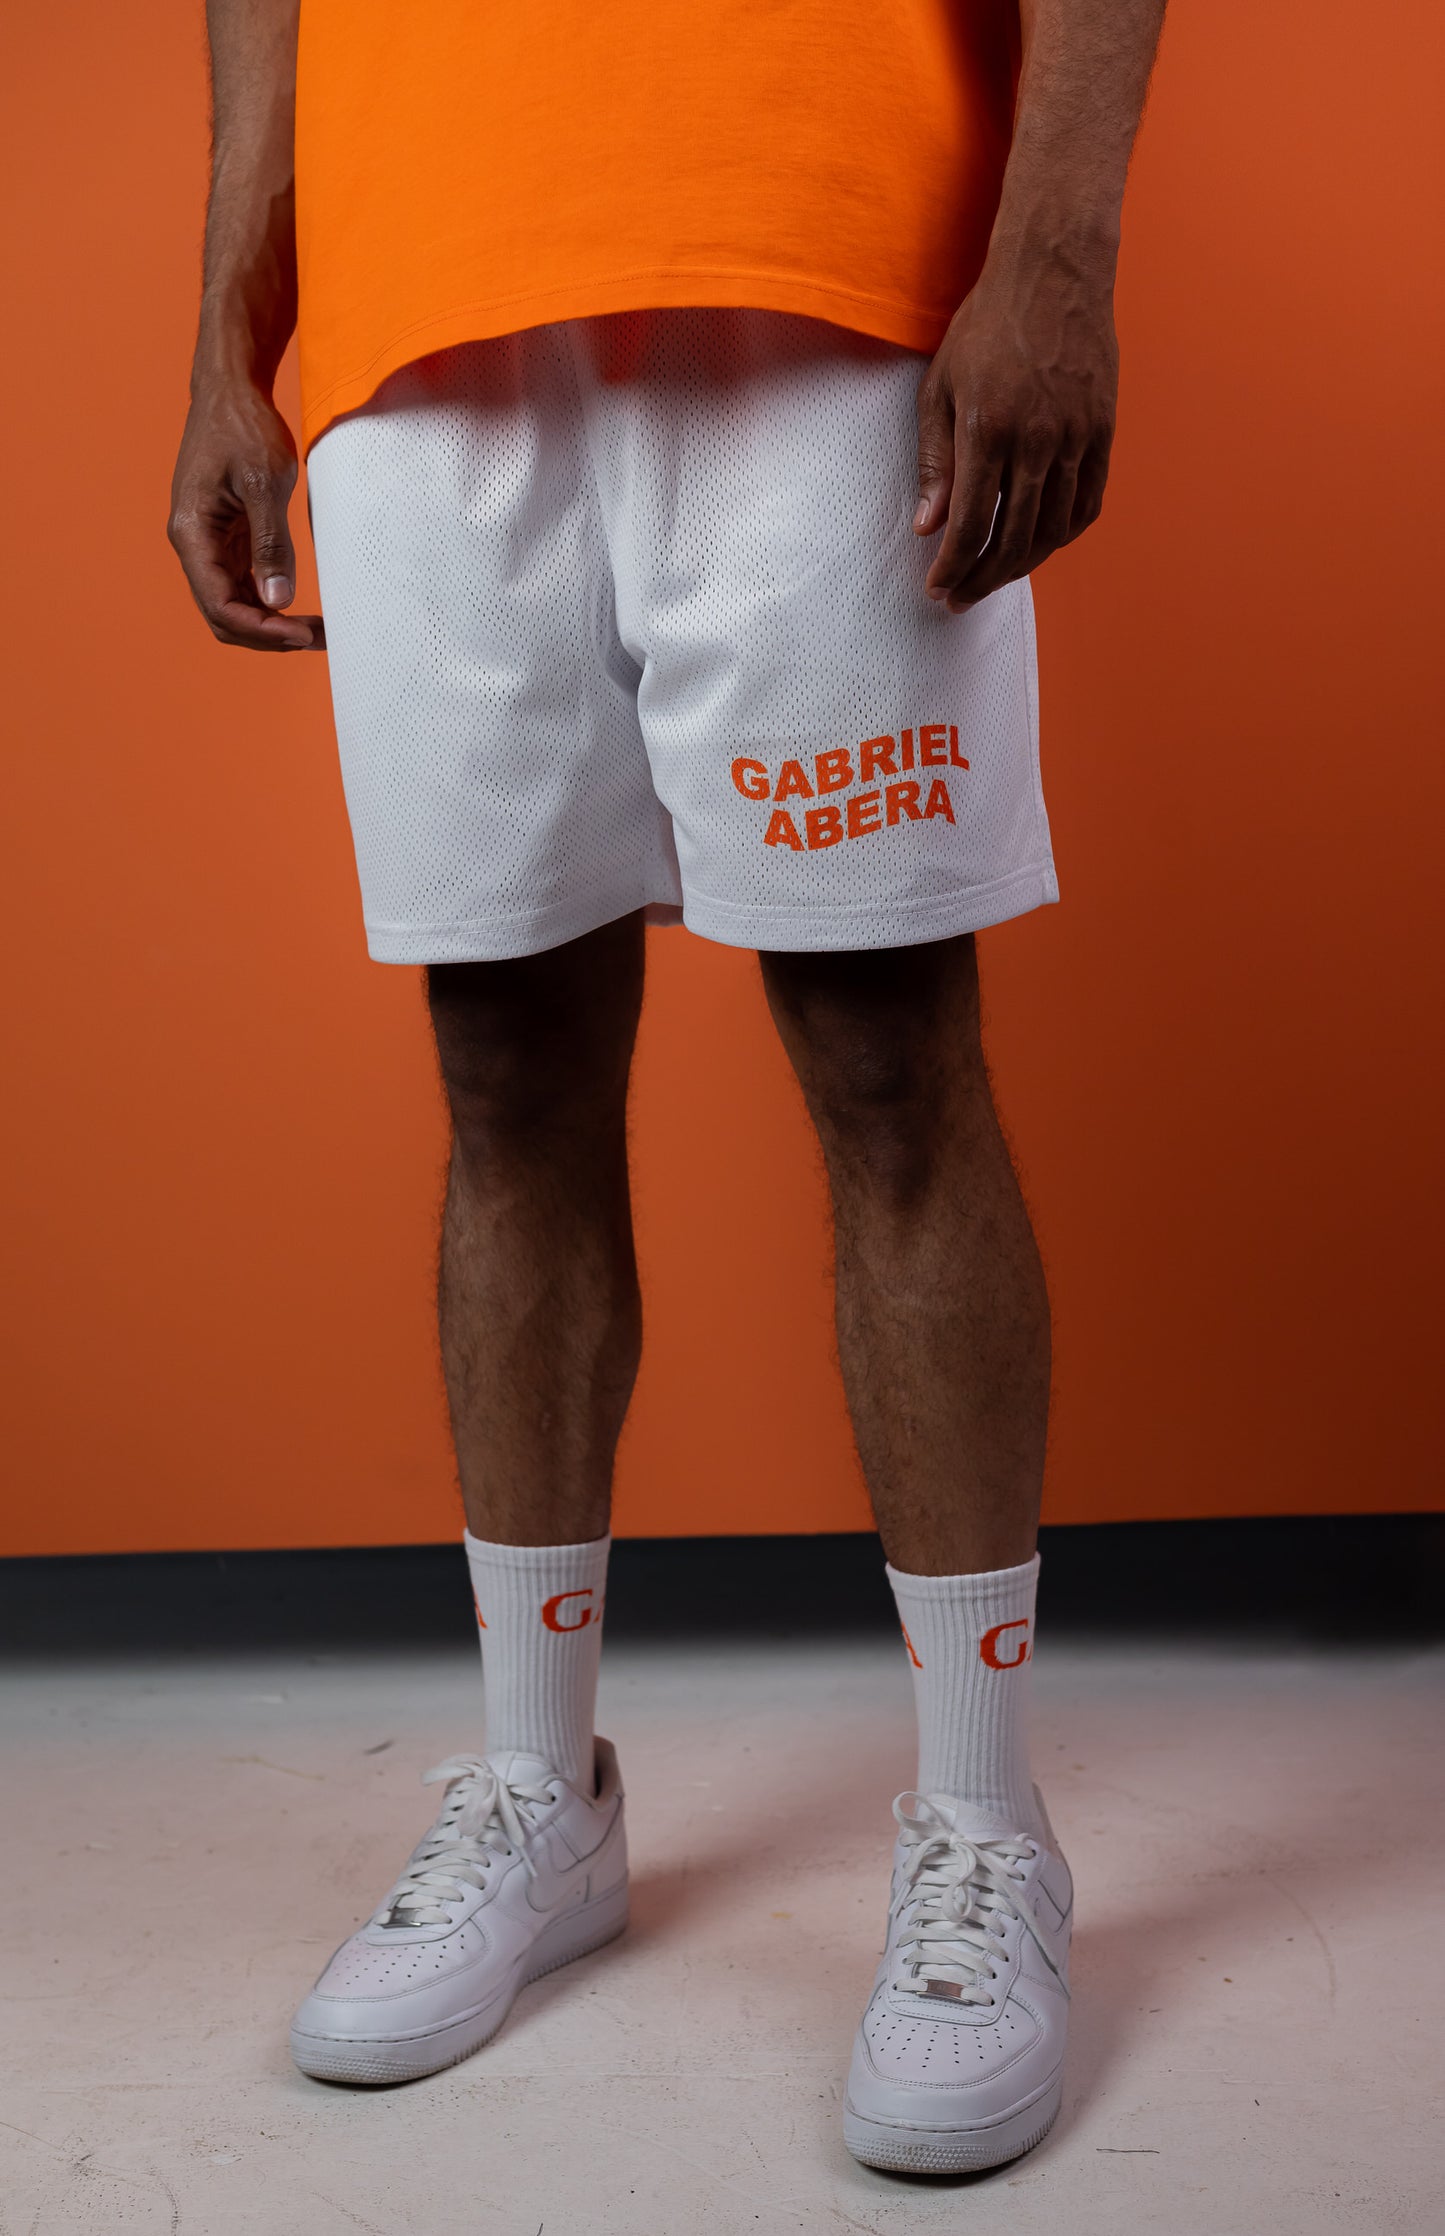 Model wearing a white mesh shorts with orange brand name print in the front